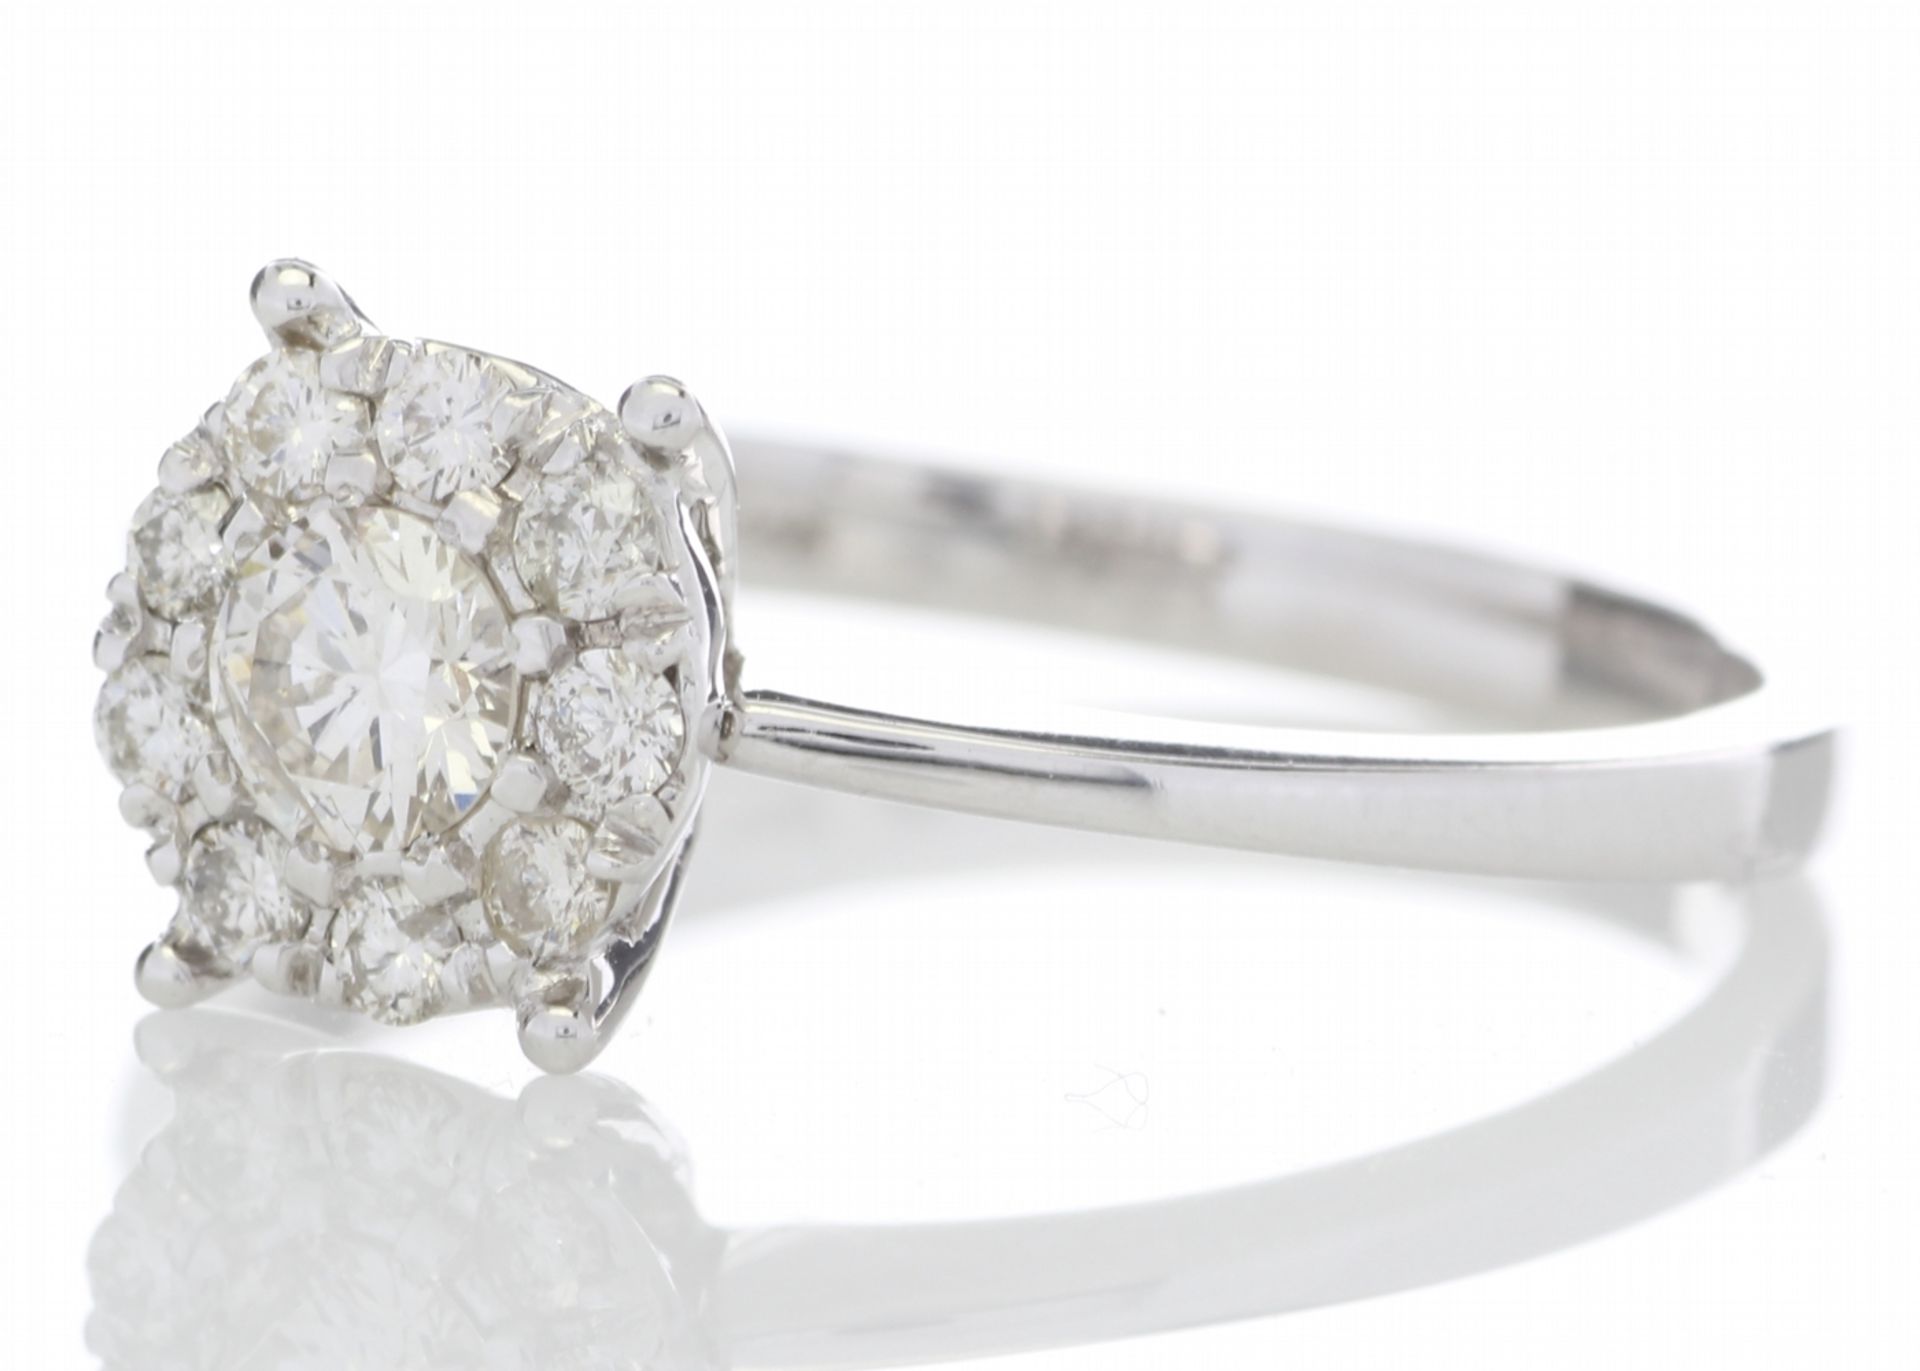 14ct Gold Flower Cluster Diamond Ring 0.50 Carats - Valued by GIE £5,995.00 - A modern classic style - Image 2 of 6